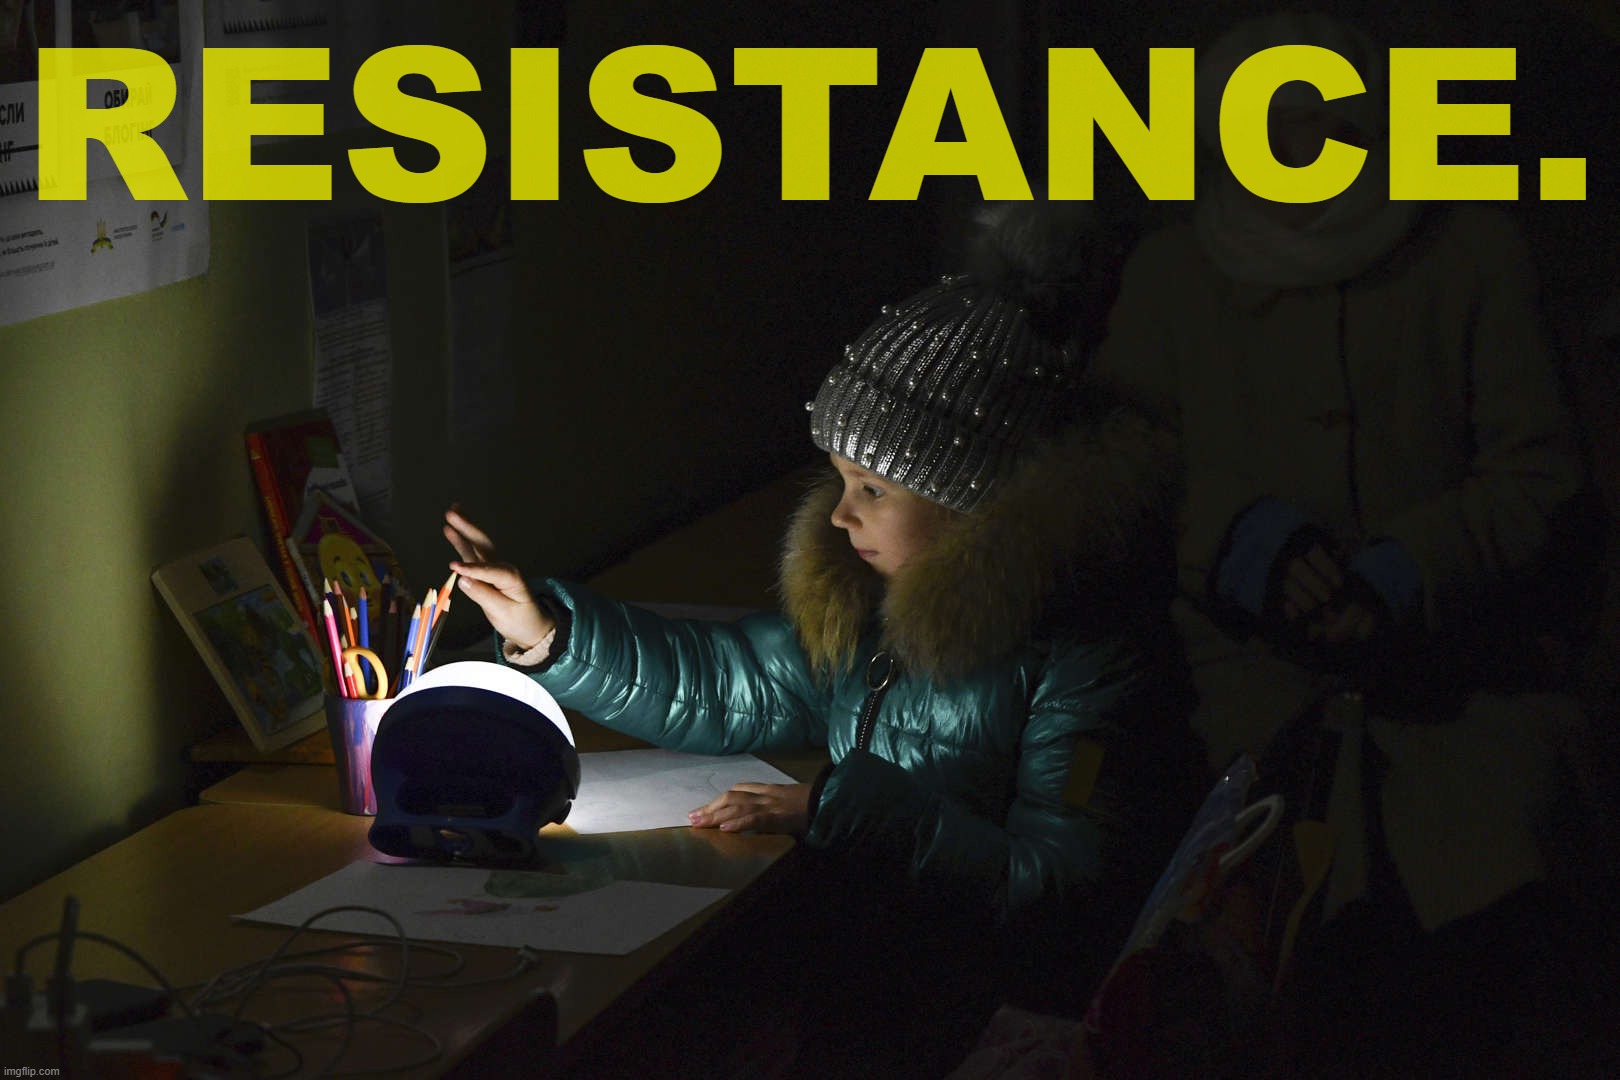 Alexandra, 11, at a "Point of Invincibility" for civilians to recharge, eat a hot meal, and warm up. [Kramatorsk, Ukr., 12/5/22] | RESISTANCE. | image tagged in ukraine point of invincibility,ukraine,ukrainian lives matter,resistance,resilience,defiance | made w/ Imgflip meme maker